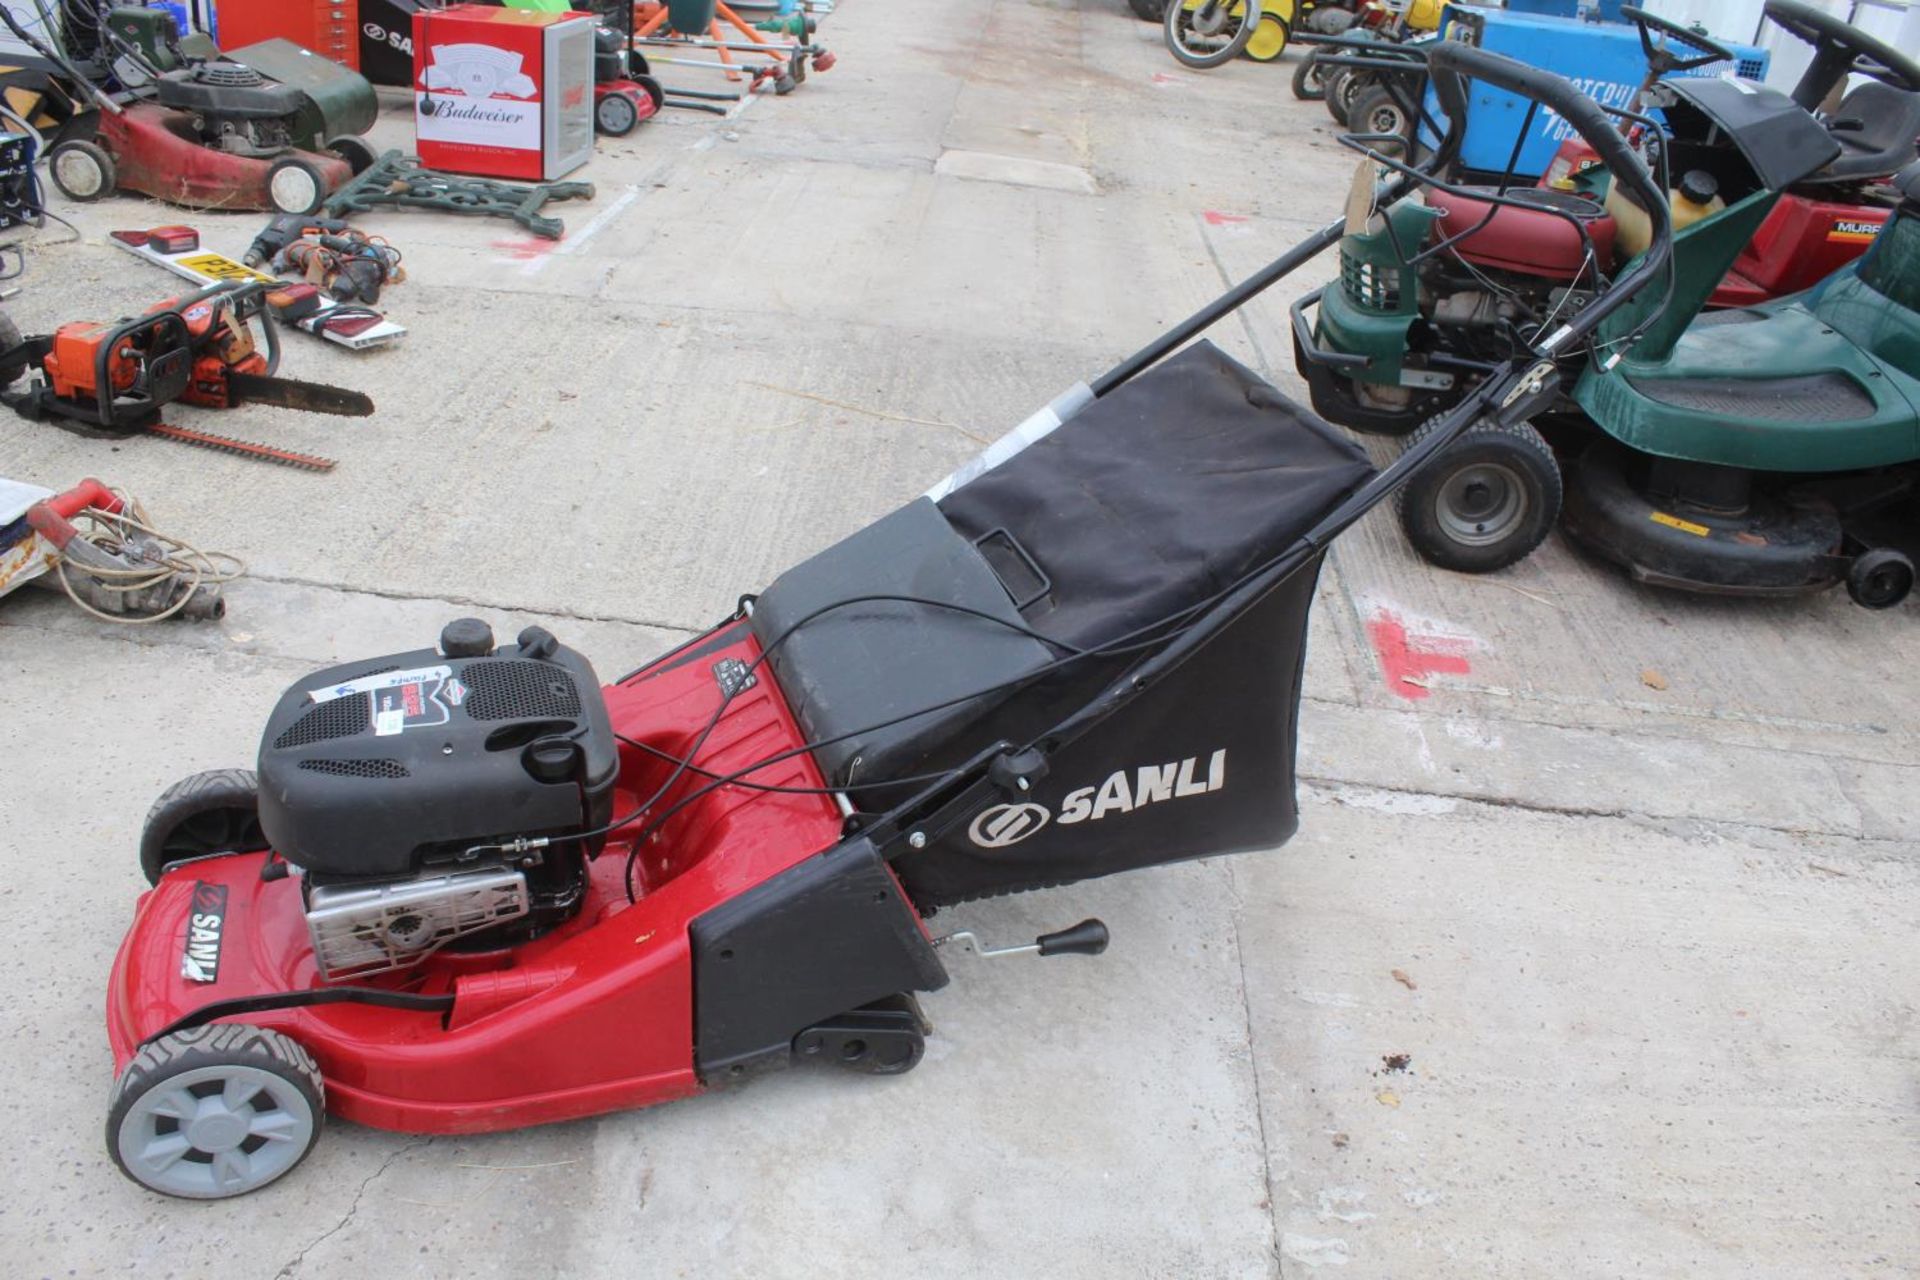 SANLI 20" ROLLER SELF PROPELLED LAWN MOWER AND BOX NO VAT